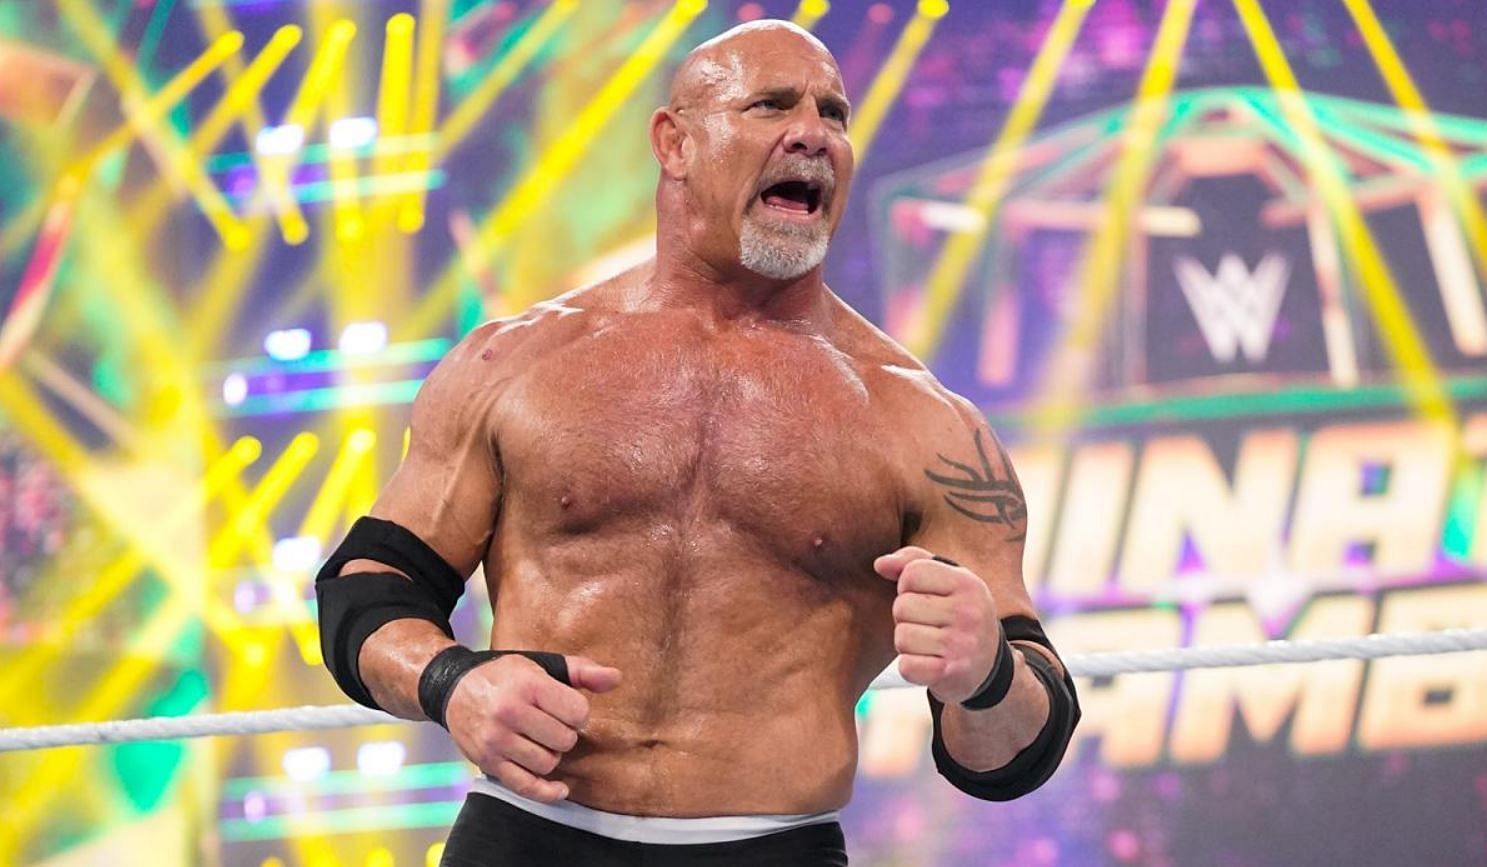 Goldberg challenged Roman Reigns at Elimination Chamber.